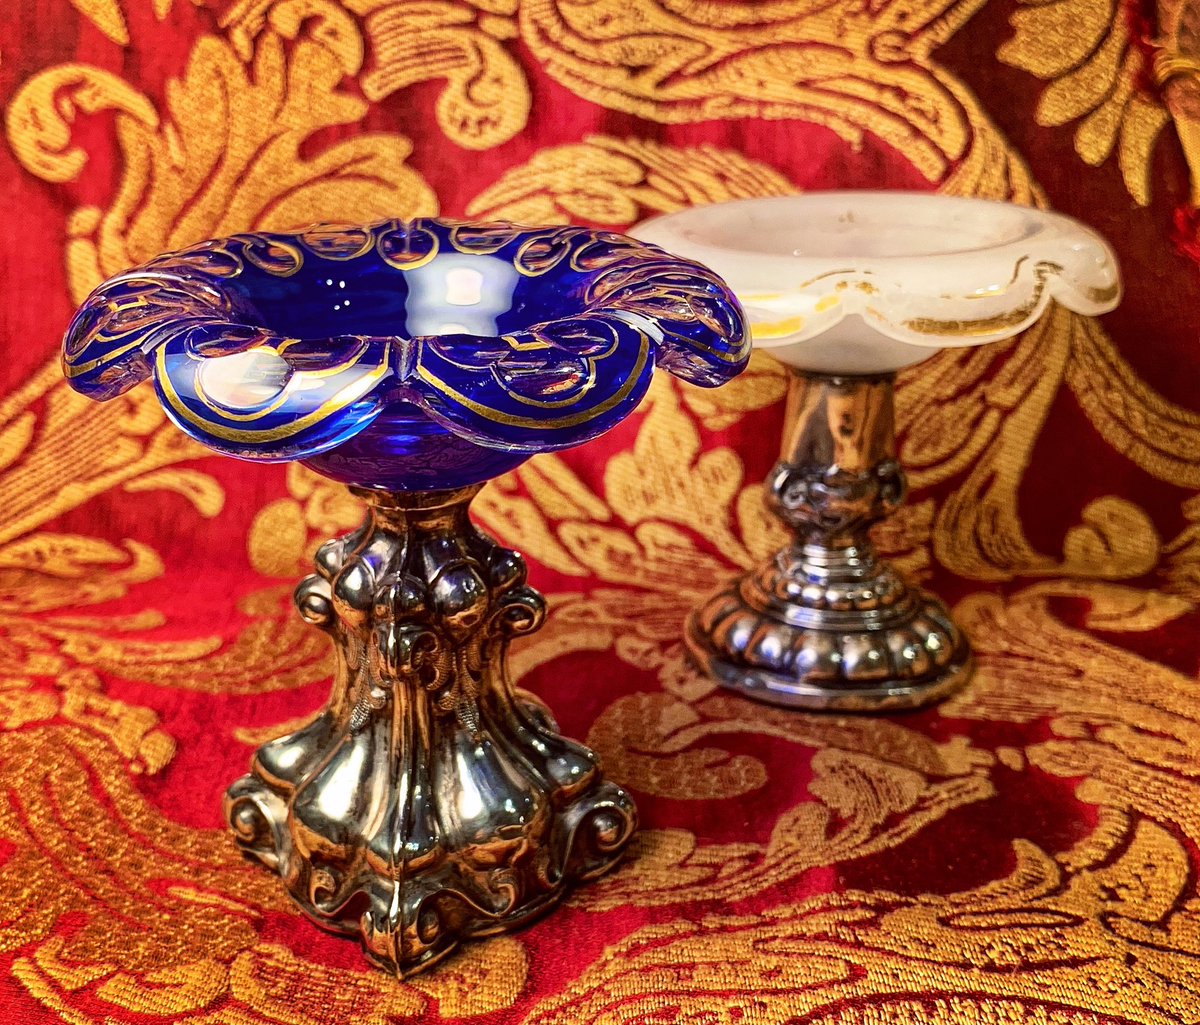 #NotOnlyMuranoGlass ! Who knows which and how many set tables these two small salt holders have embellished, one in layered cobalt blue glass and the other in opaline glass, both on a silver stem from the Biedermeier era?